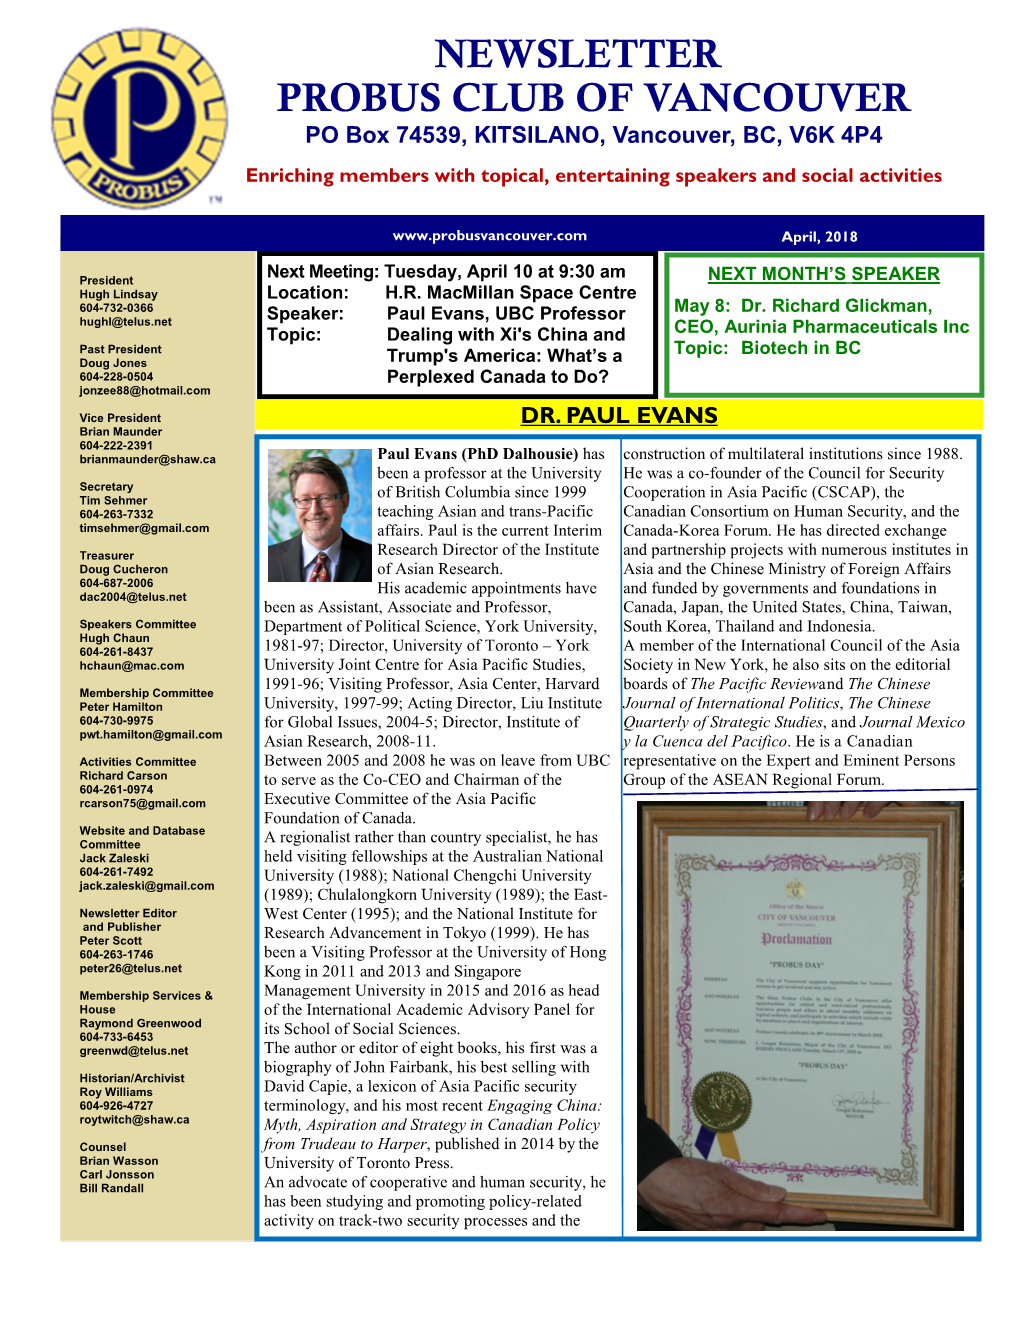 Probus Club of Vancouver Newsletter